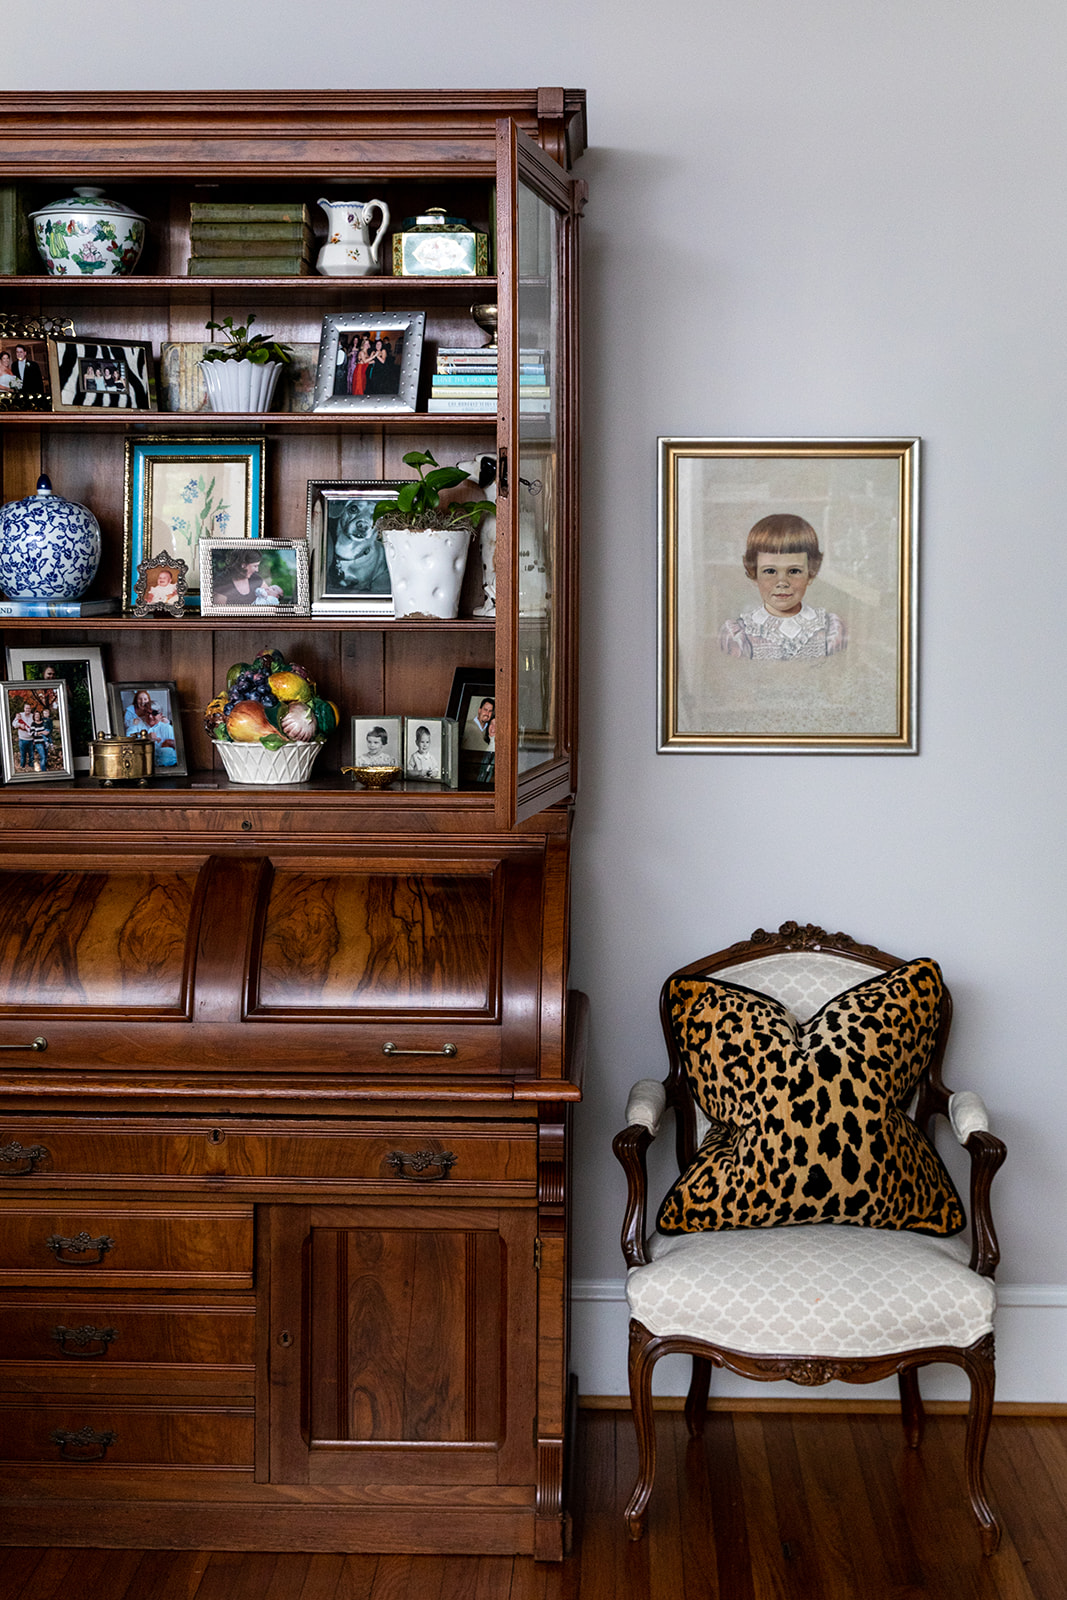 Brown wood hutch decorated with books, image frames, porcelain jars, urns and vases with a touch of greenery and fruit. Next to it staged a baby girl painting and an armchair with a leopard pattern throw pillow.